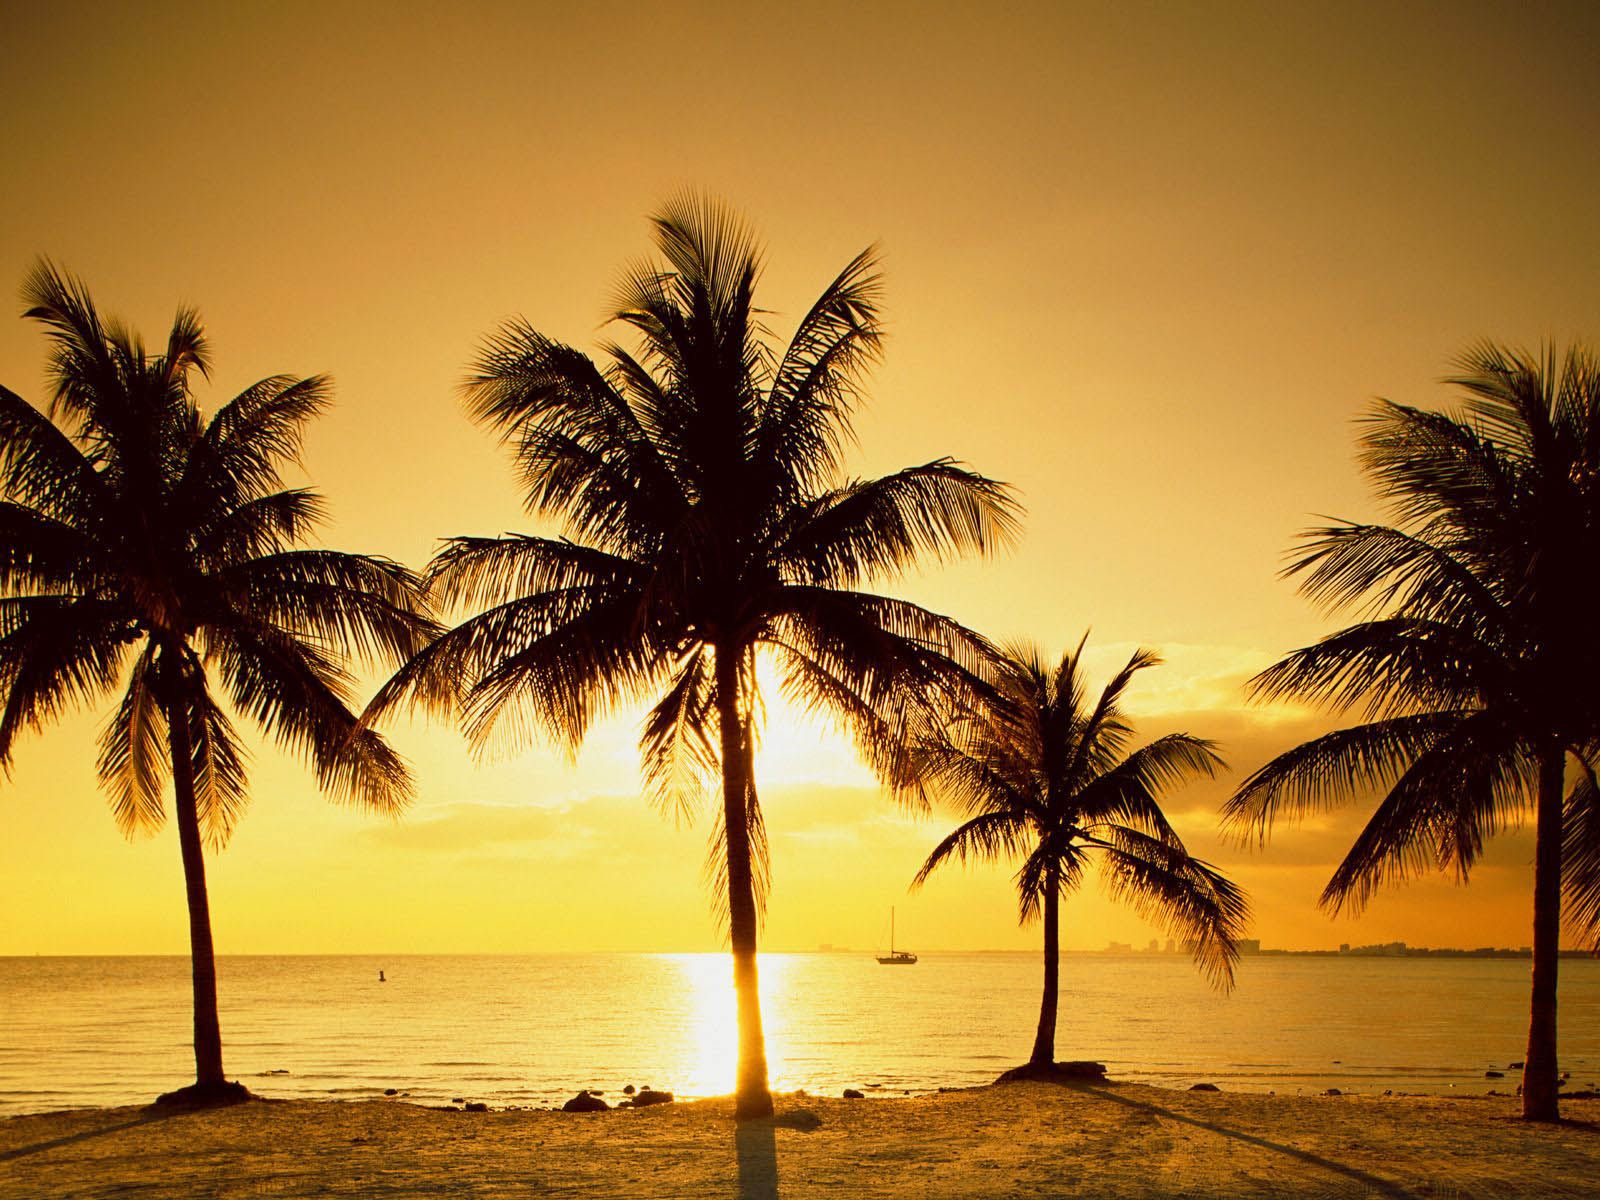 Silhouette of palm trees on a beach at sunset - Palm tree